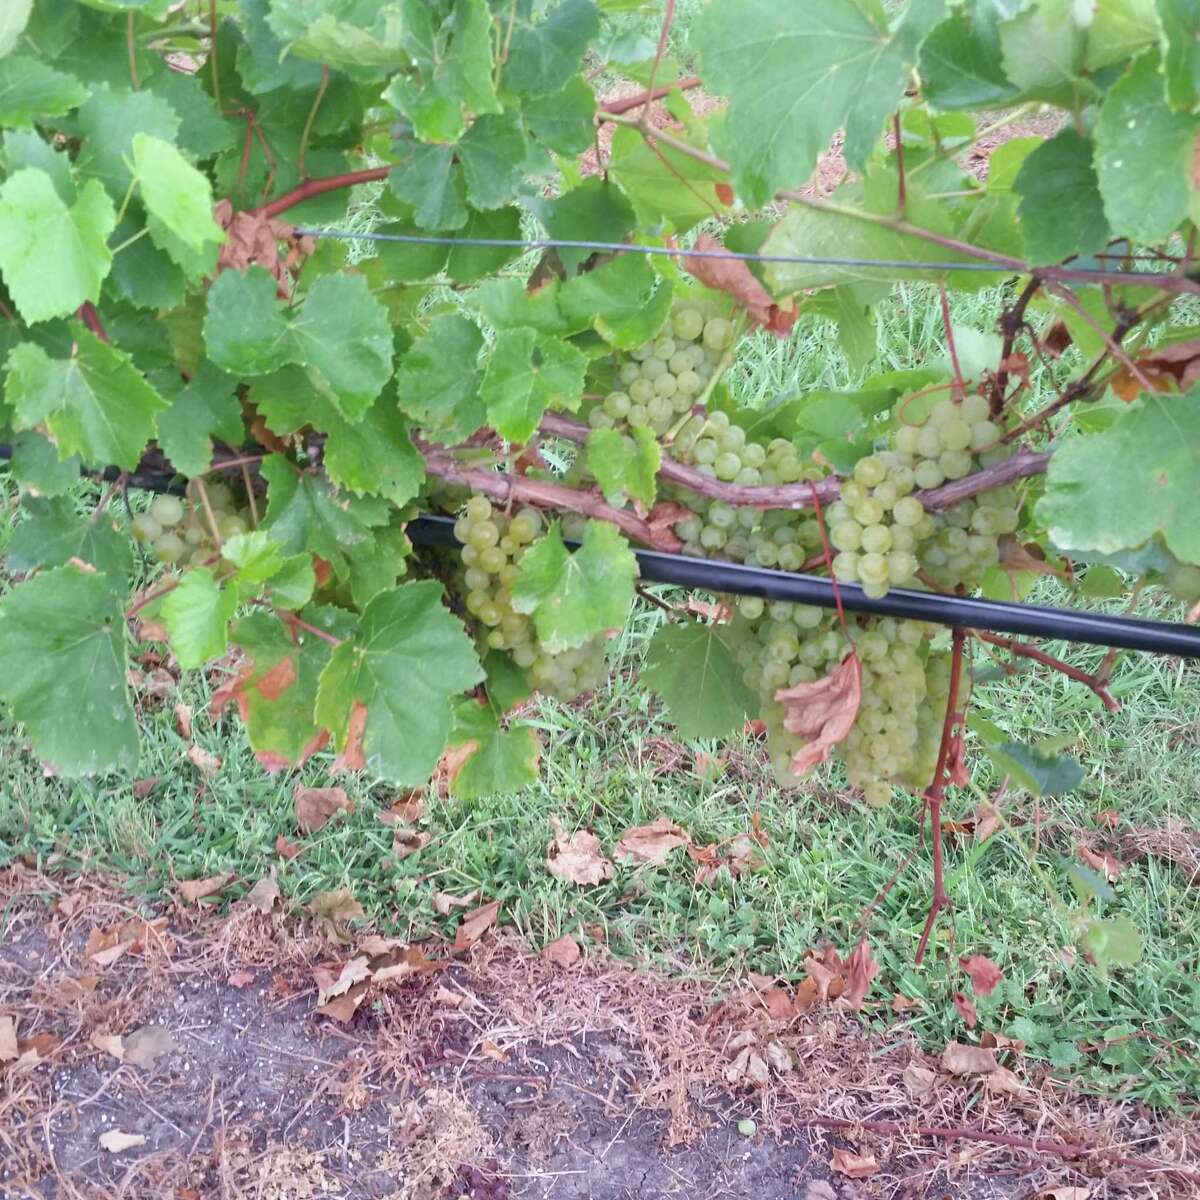 Blanc du Bois grapes being harvested at Bernhardt Winery this past weekend.